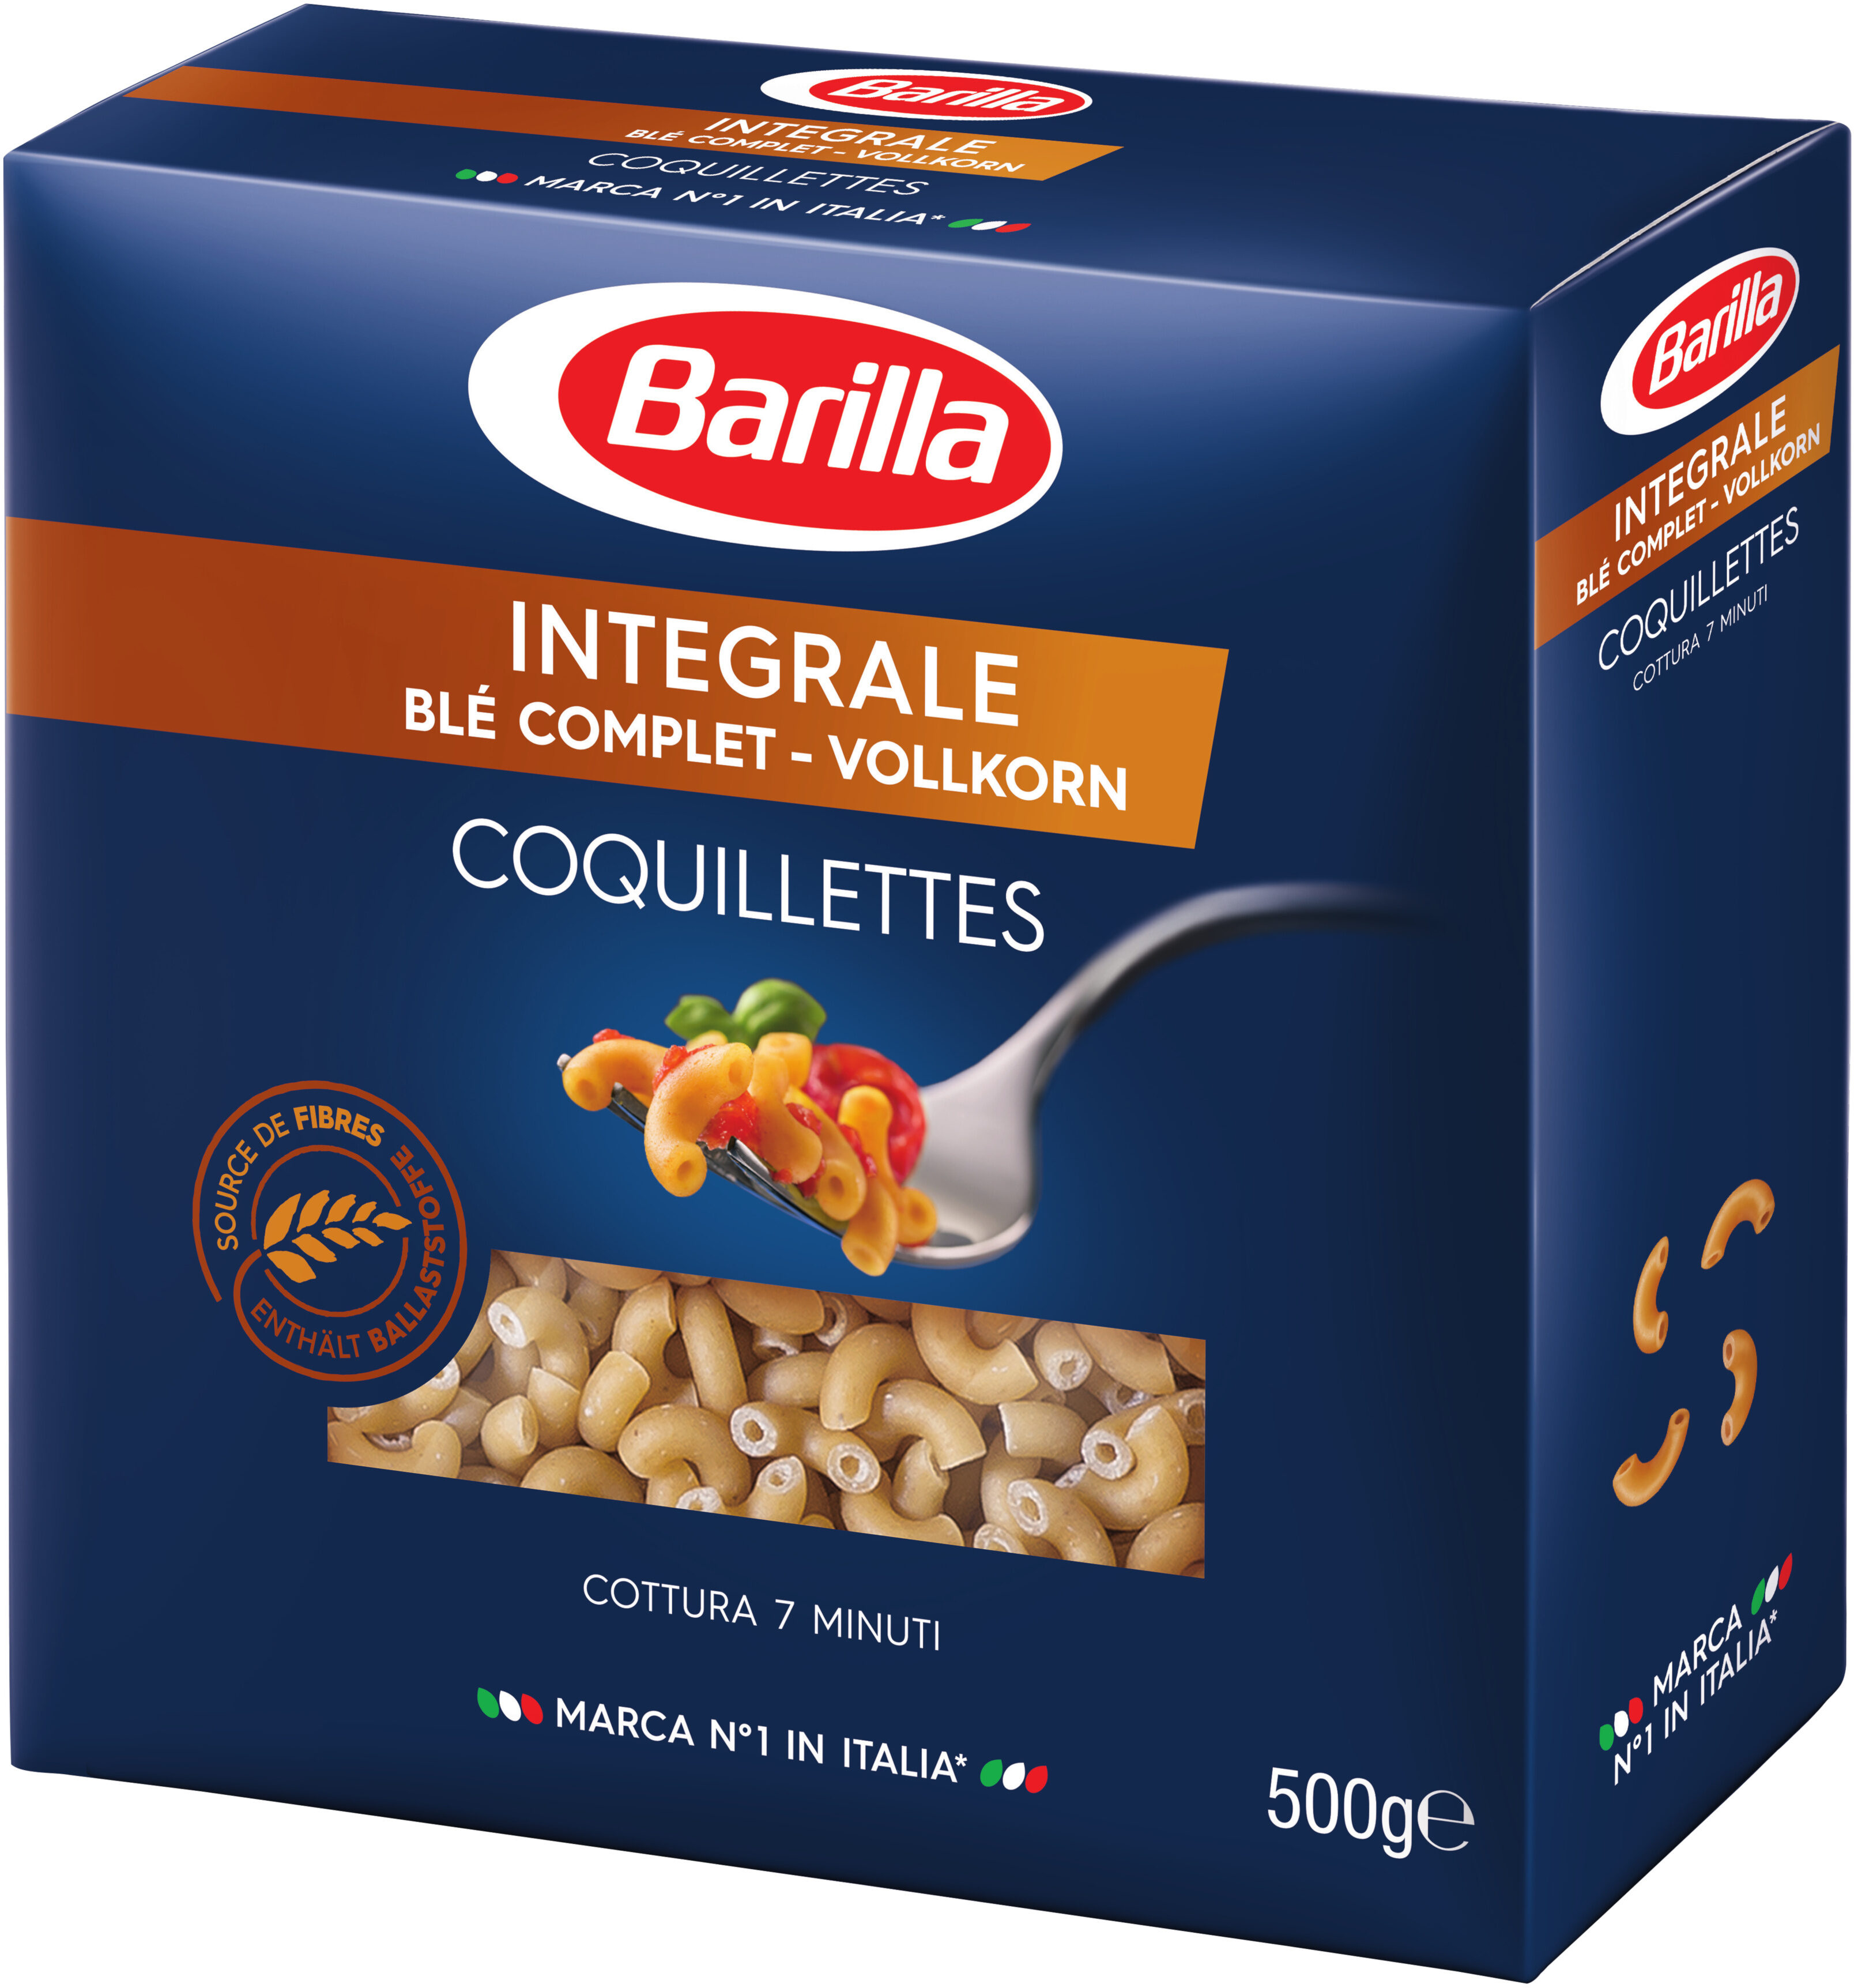 Barilla pates integrale coquillettes au ble complet 500g - Product - fr